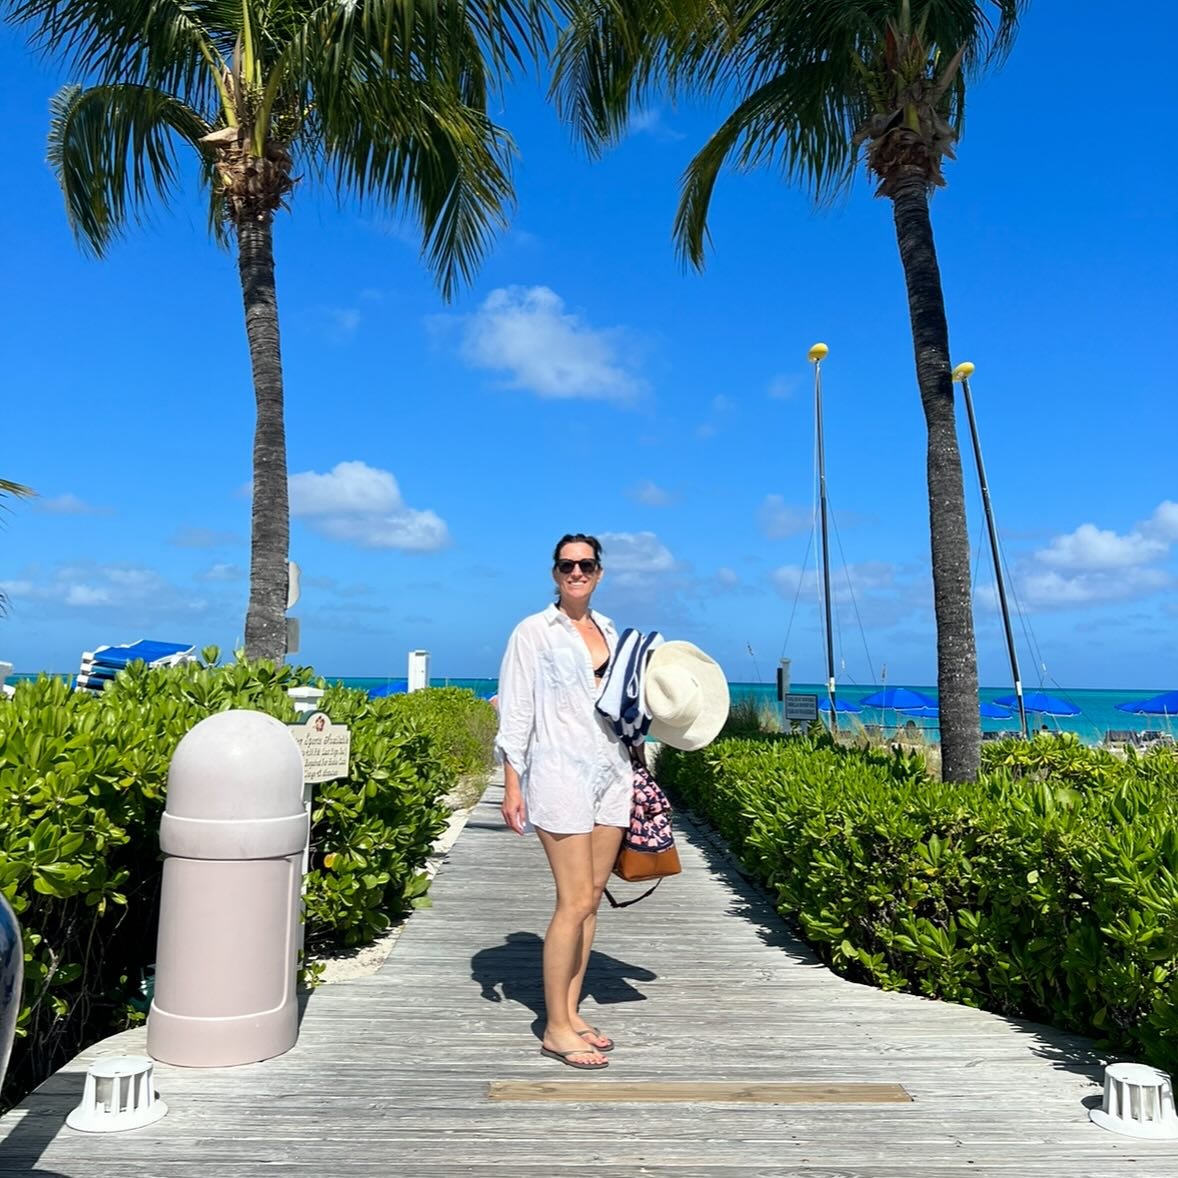 What 5 things can you not travel without?
.
For me the top 5 items are
✔️Portable charger
✔️My computer for work
✔️Great moisturizers and hair products (especially when down south)
✔️A sun hat 
✔️Lots of Accessories and Jewelry, which change any outf